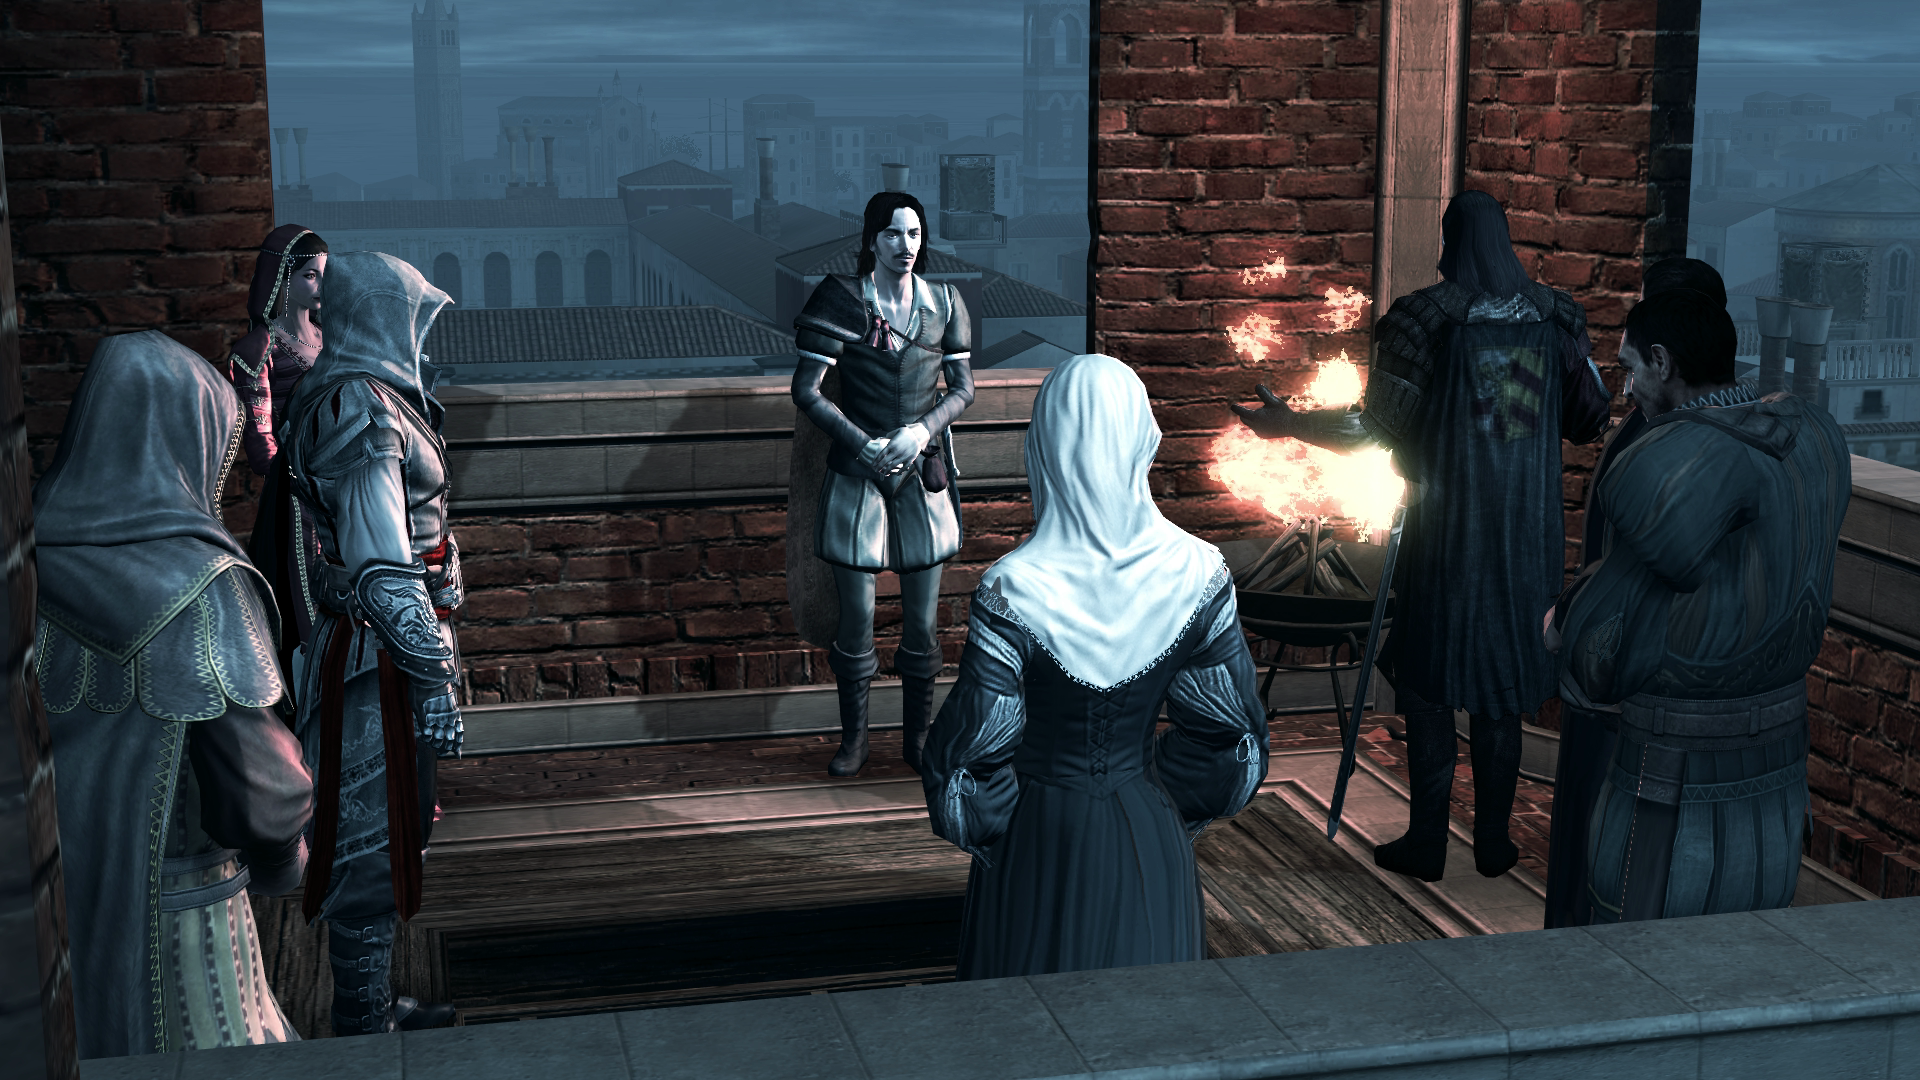 House of Auditore, Assassin's Creed Wiki